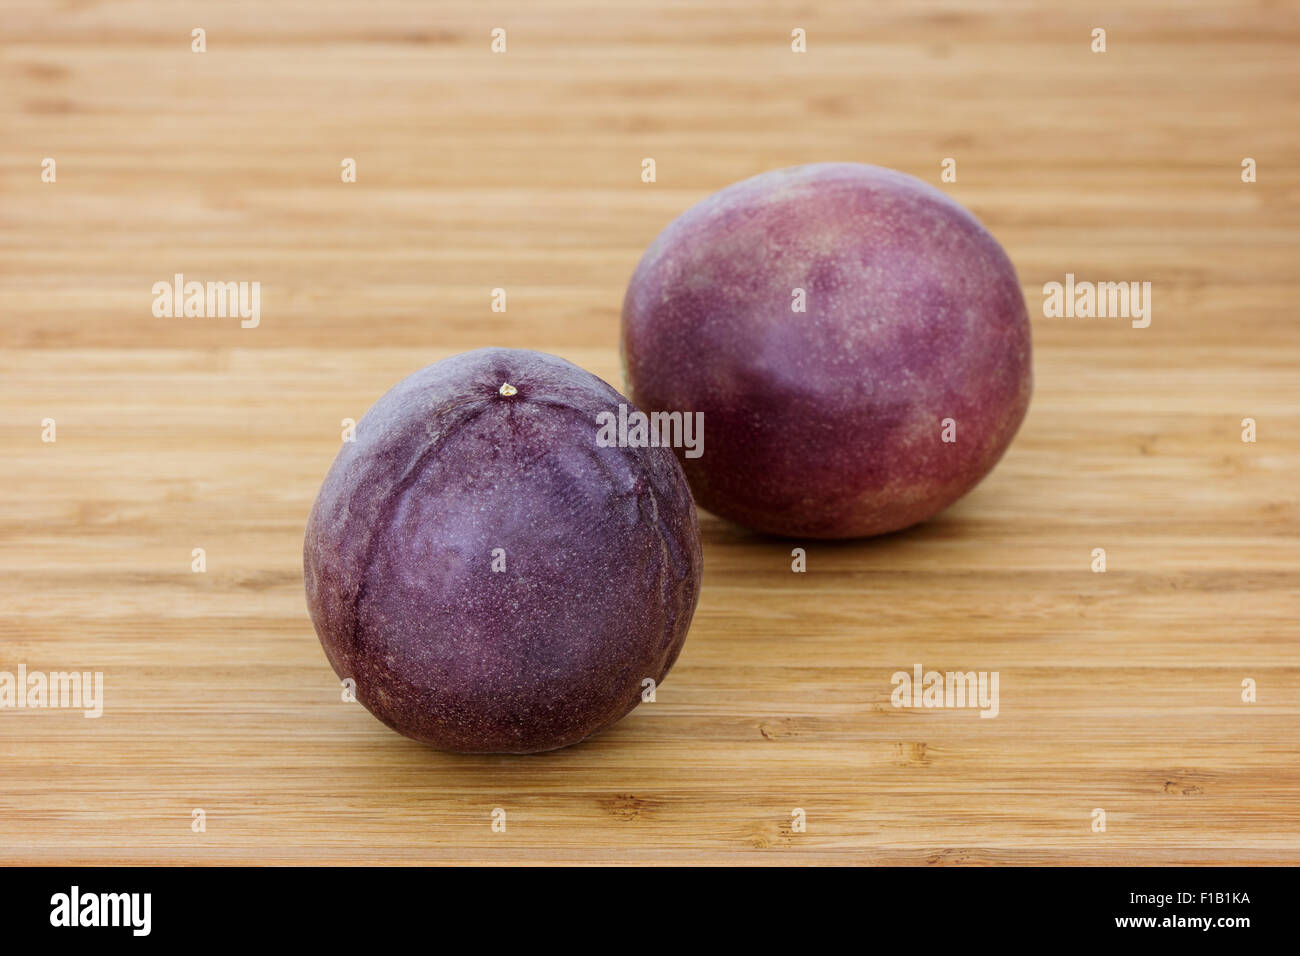 Close-up of two whole passion fruits (passionfruit, purple granadilla (Passiflora edulis)) on a wooden table. Stock Photo